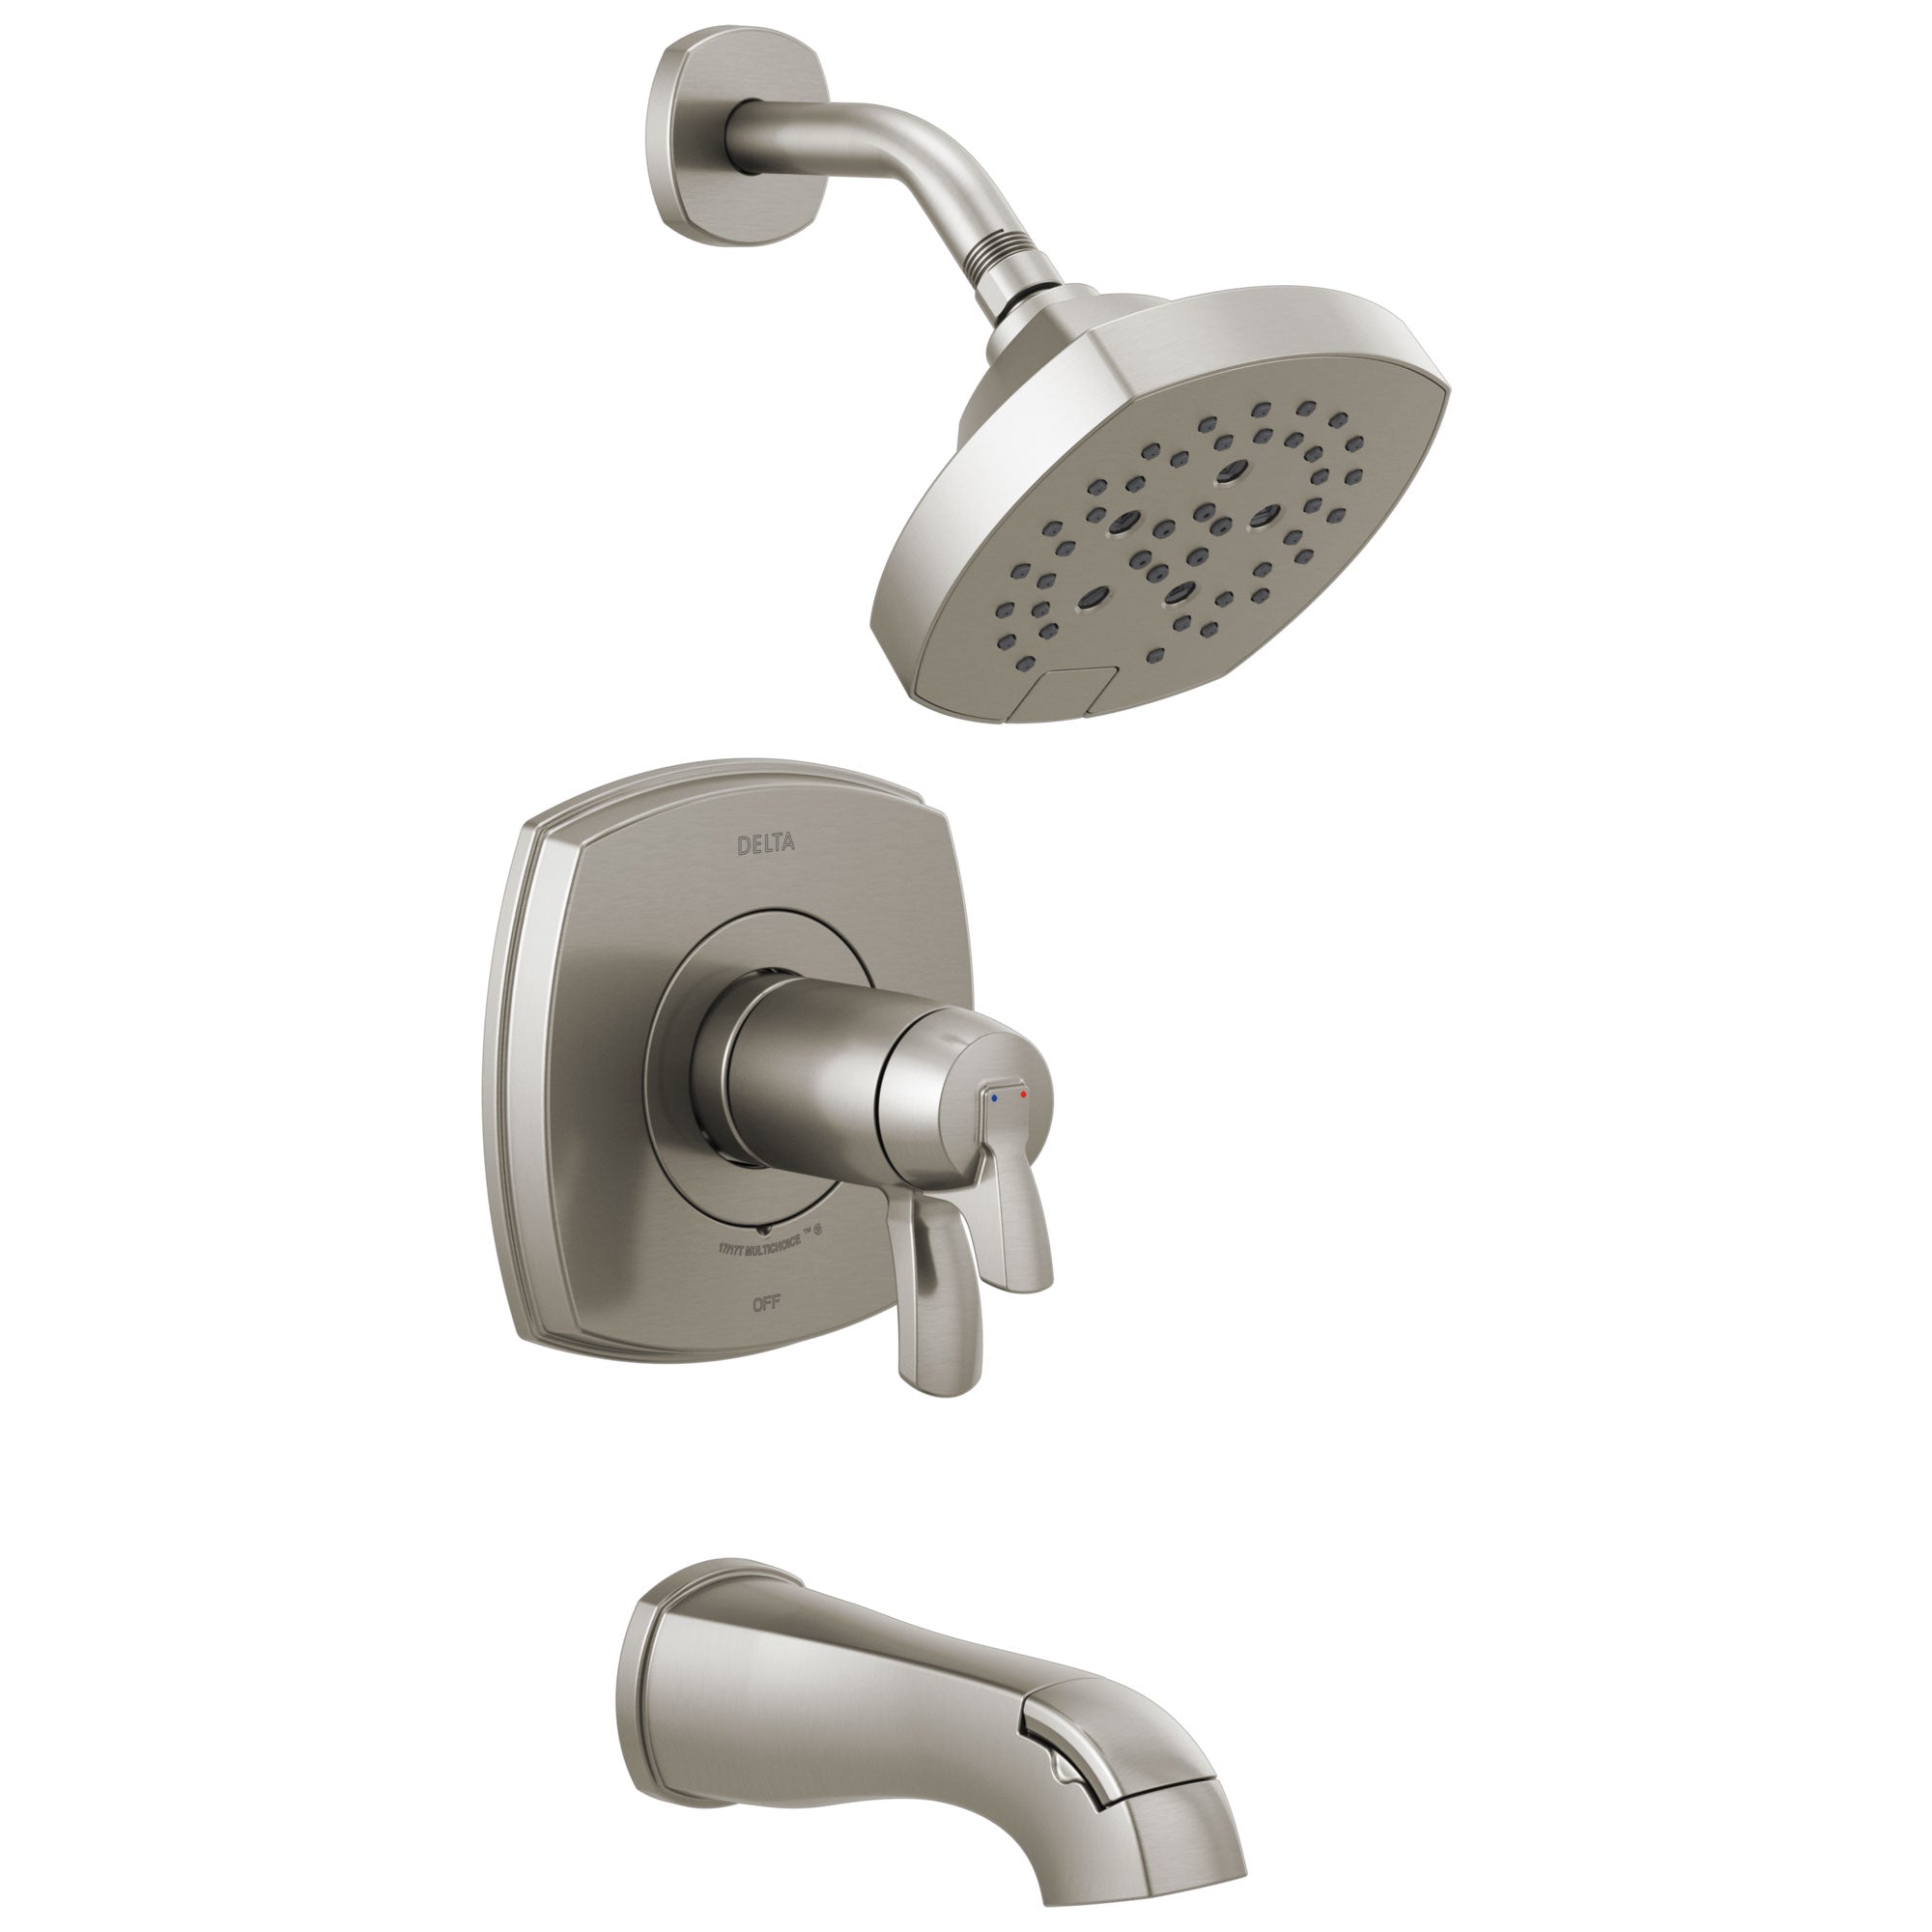 Delta Stryke Stainless Steel Finish 17T Thermostatic Tub and Shower Faucet Combination Includes Handles, Cartridge, and Valve without Stops D3227V